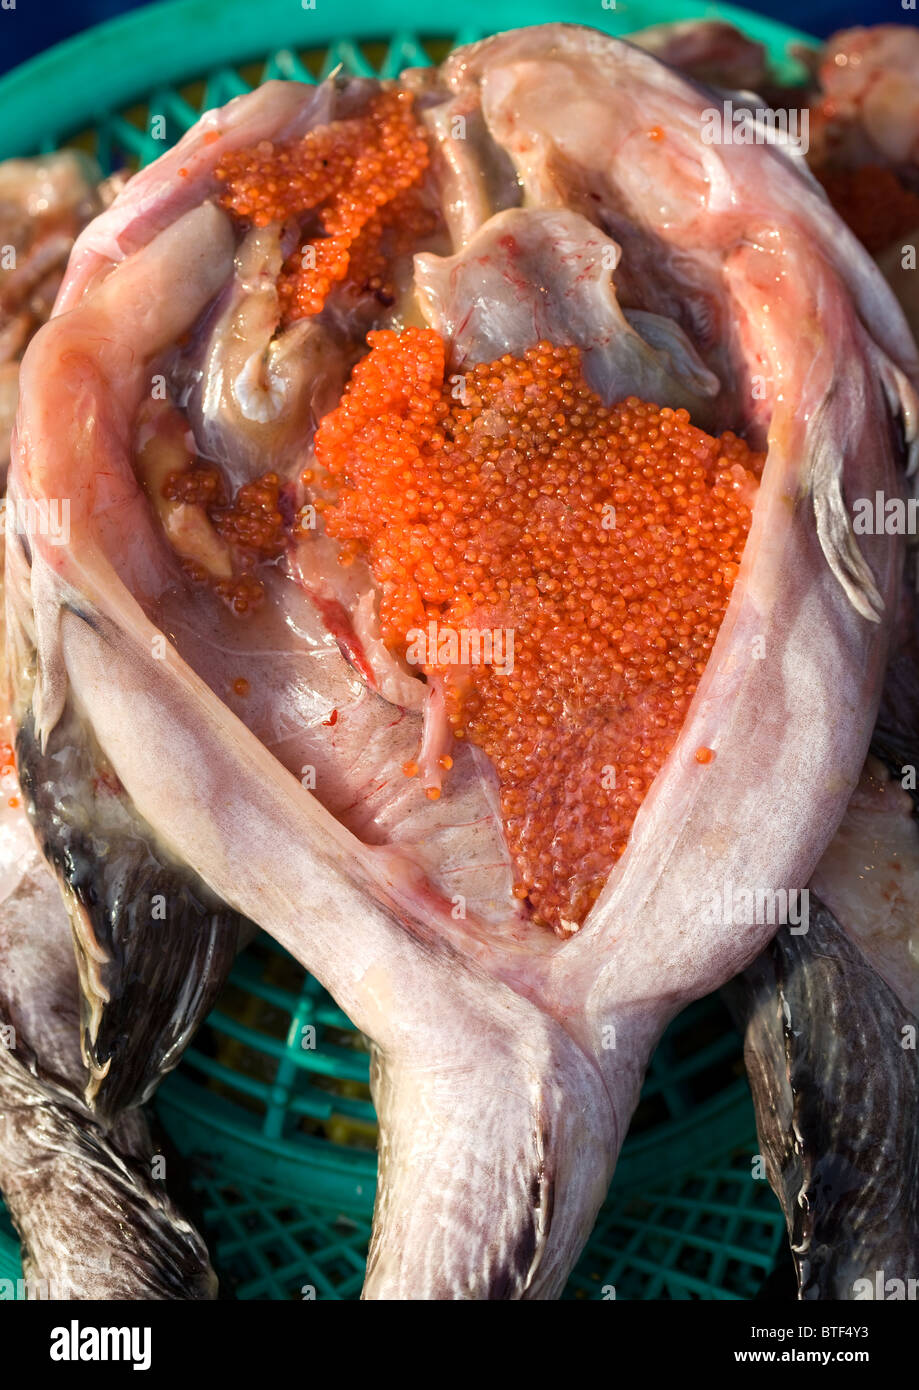 Monkfish on sale at market in Seoul South Korea showing liver and roe Stock Photo